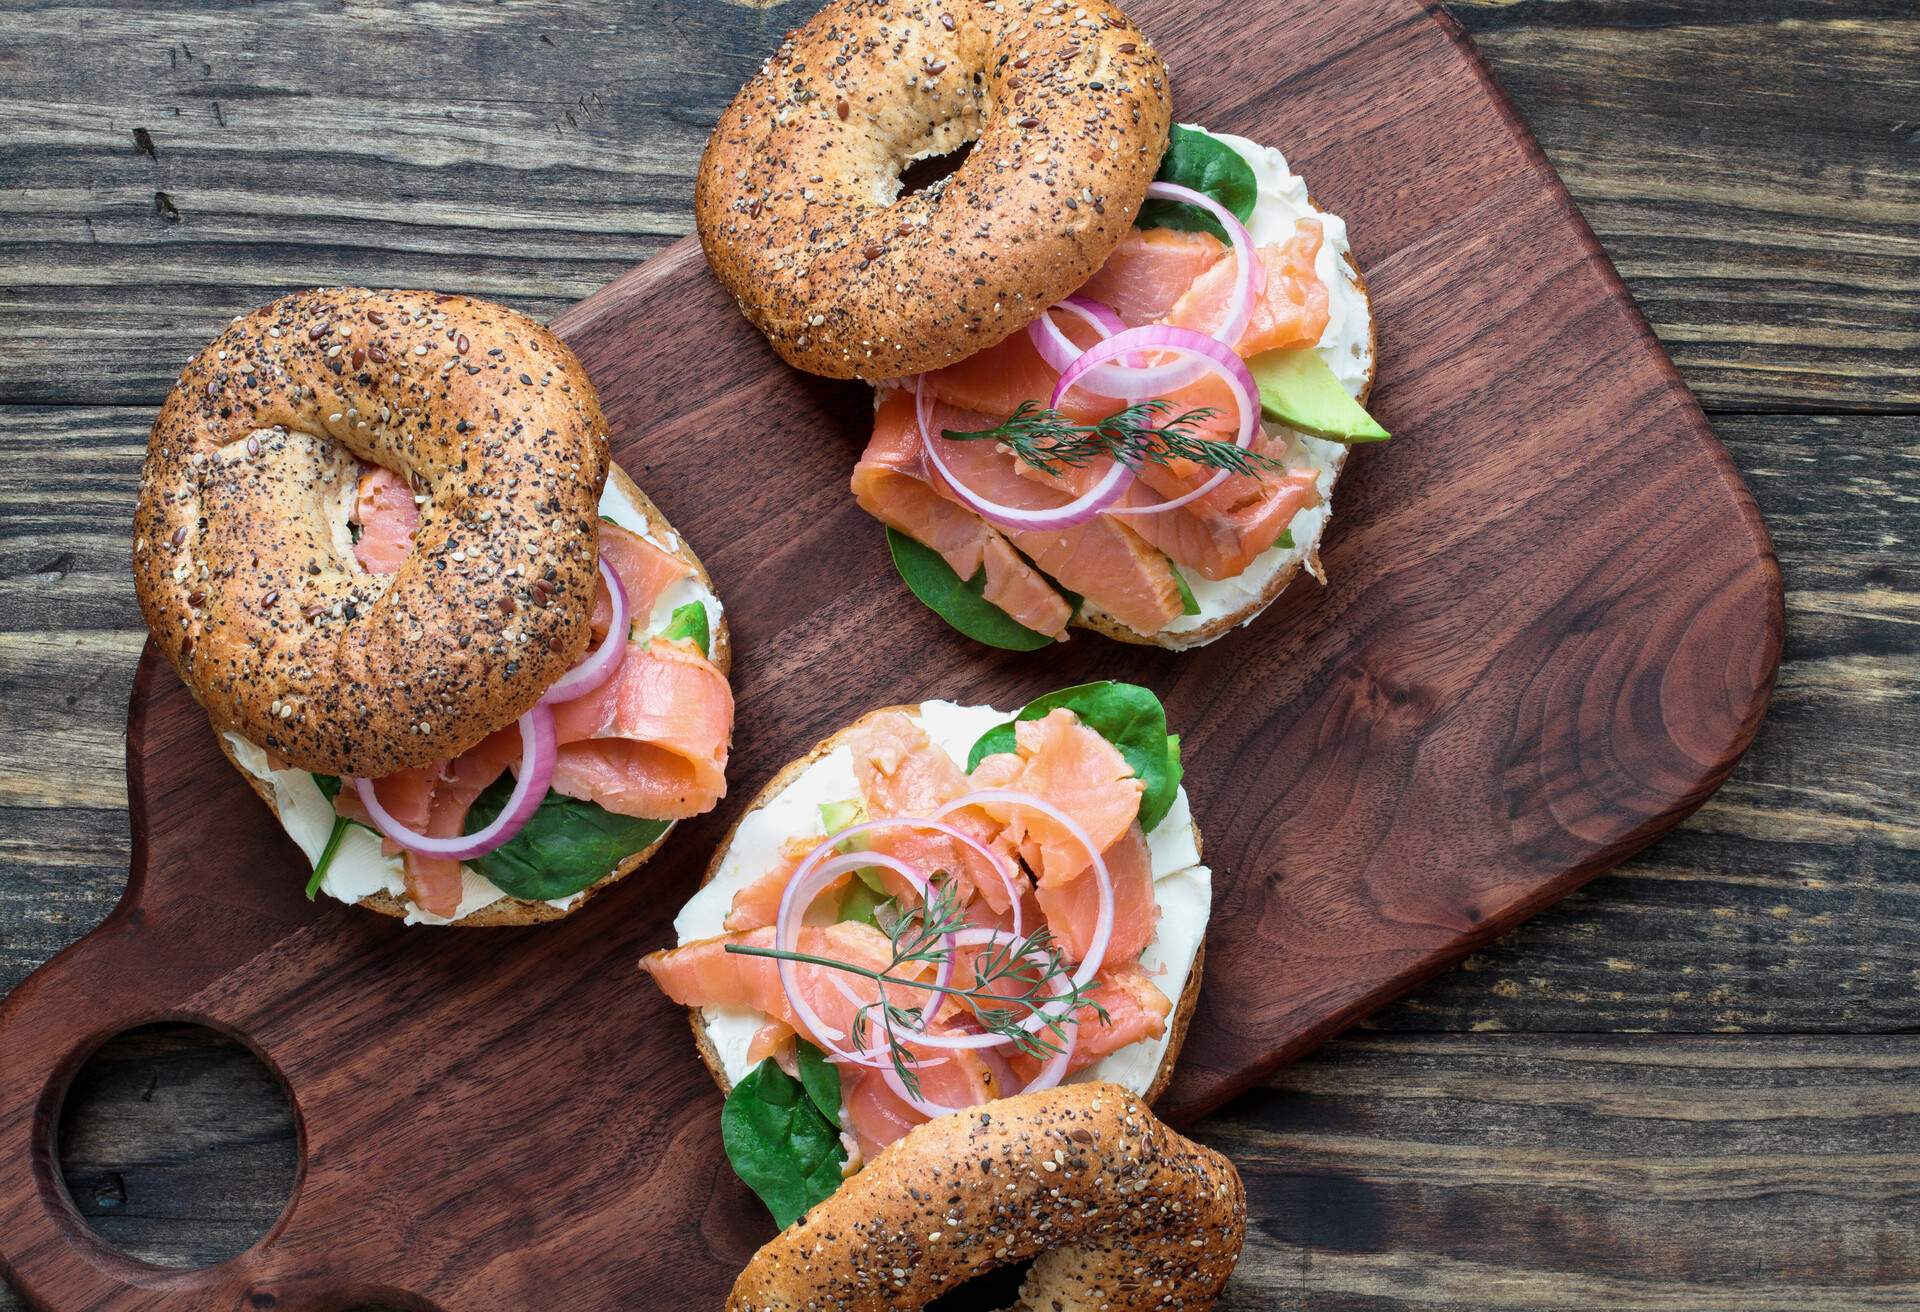 Lox - Everything bagel with smoked salmon, spinach, red onions, avocado and cream cheese over a rustic wood table background. Image shot from top view or flat lay position.